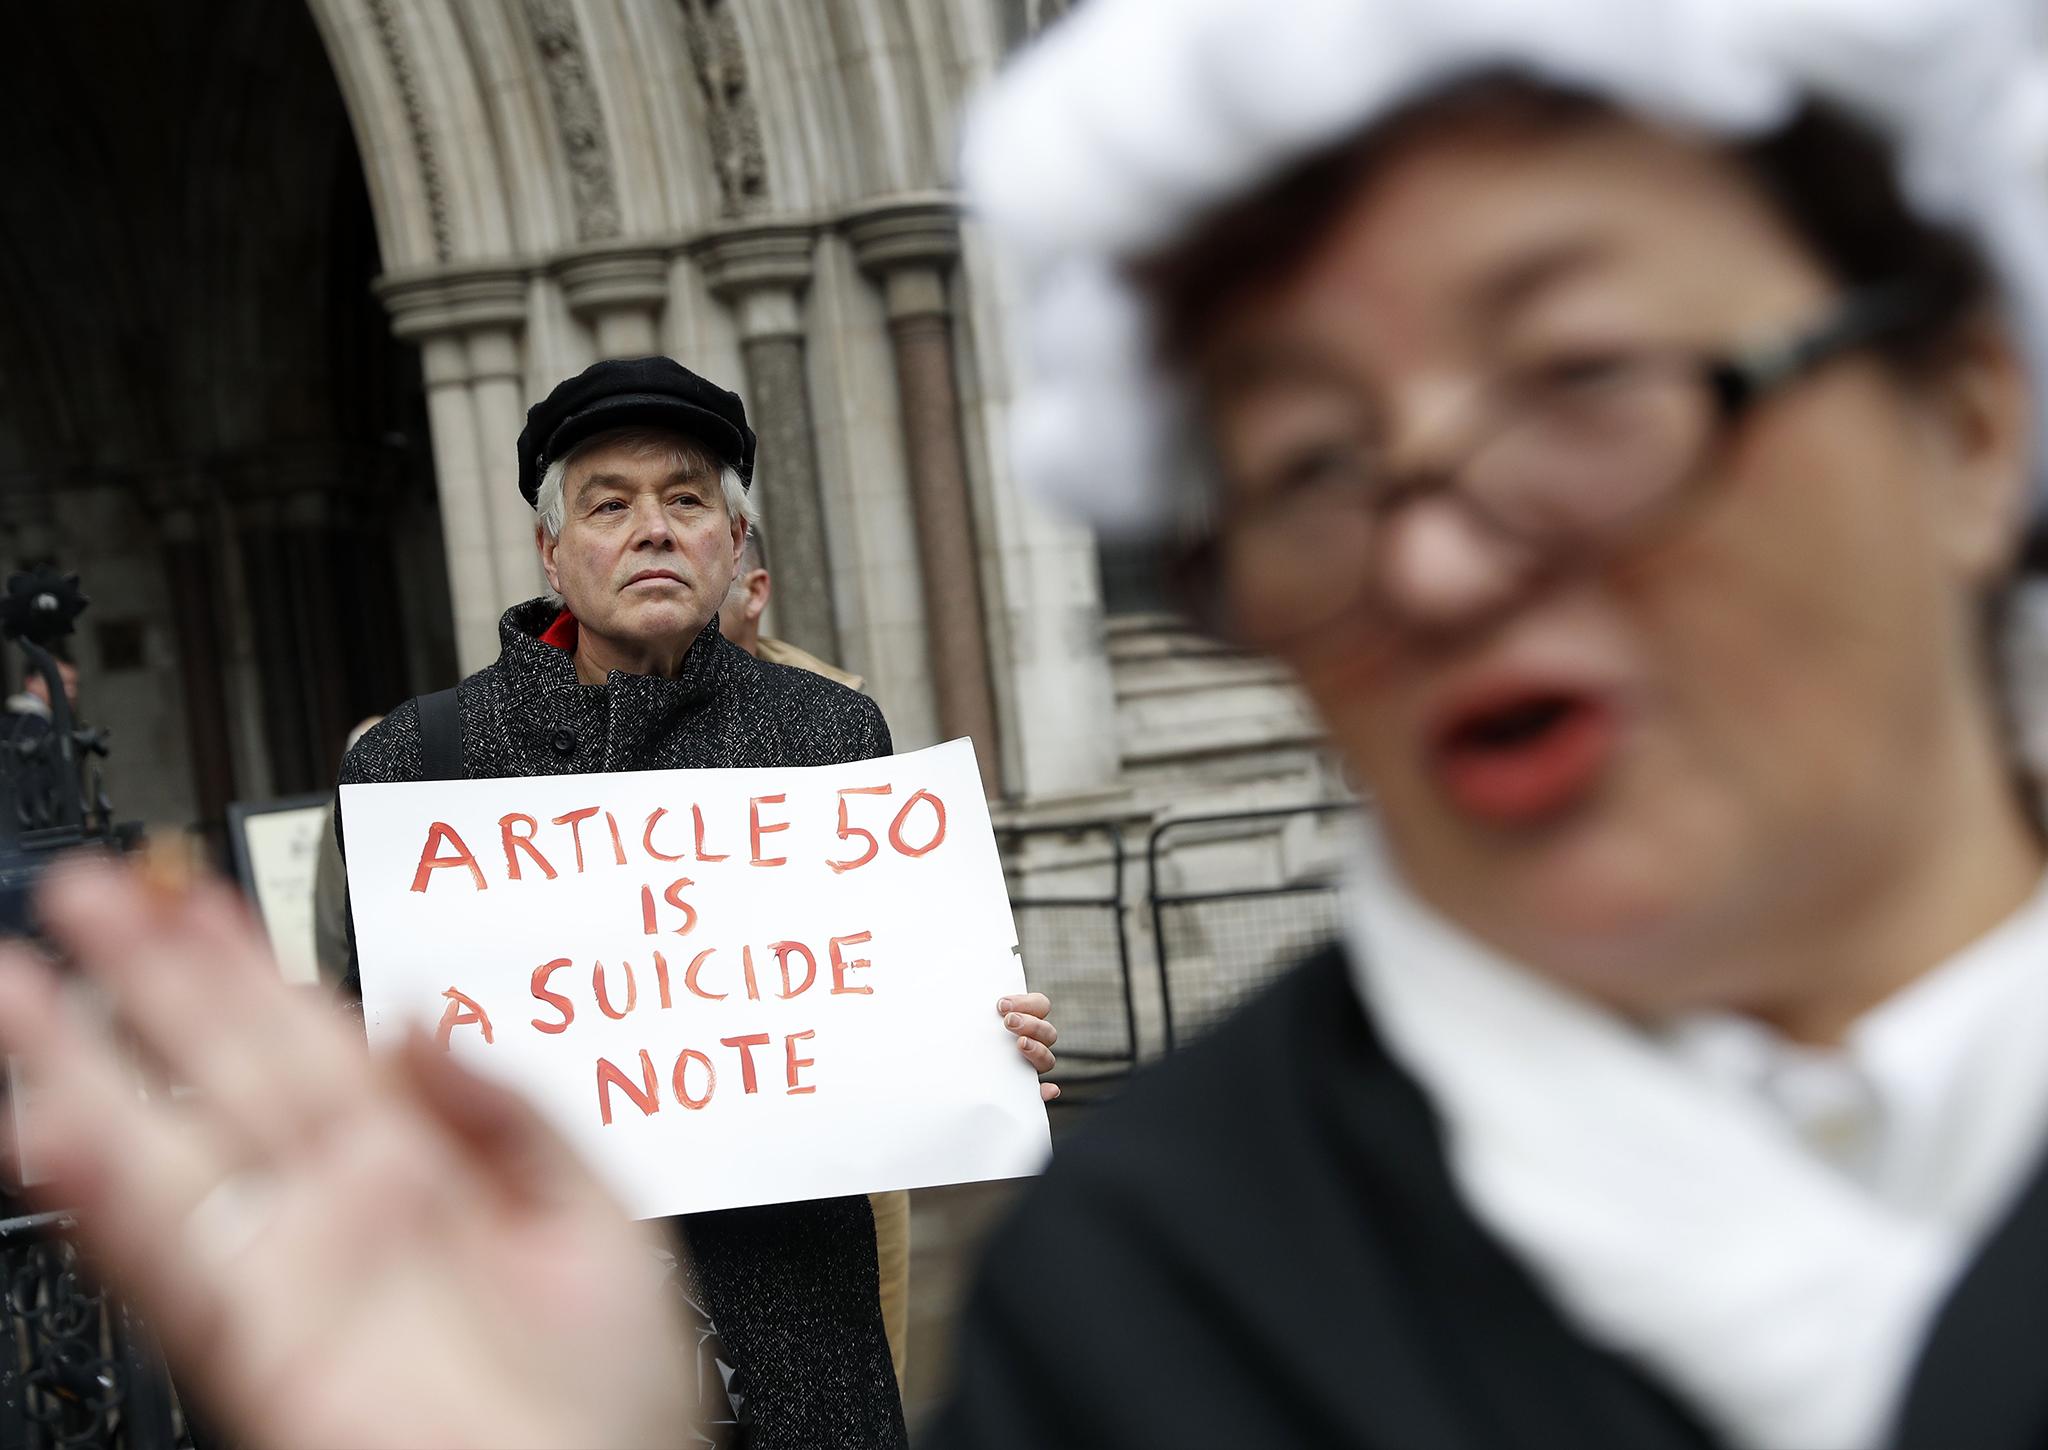 A pro-Brexit supporter (R) from Invoke Article 50 Now!, dressed as a judge, stands in front of a Pro-European Union supporter outside the entrance to The Royal Courts of Justice, Britain's High Court, in London on October 13, 2016